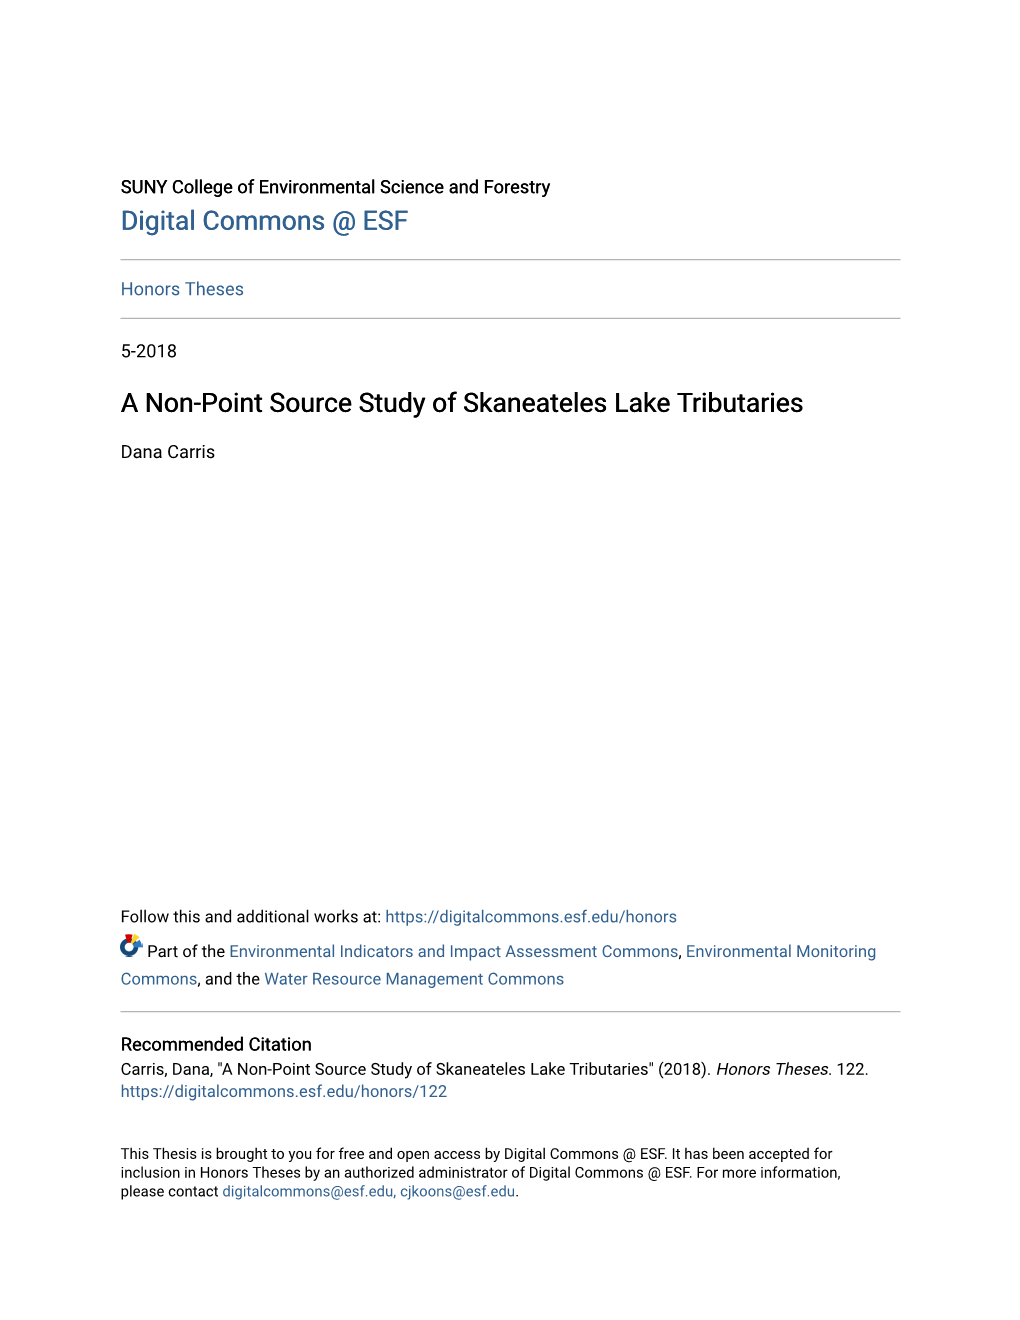 A Non-Point Source Study of Skaneateles Lake Tributaries